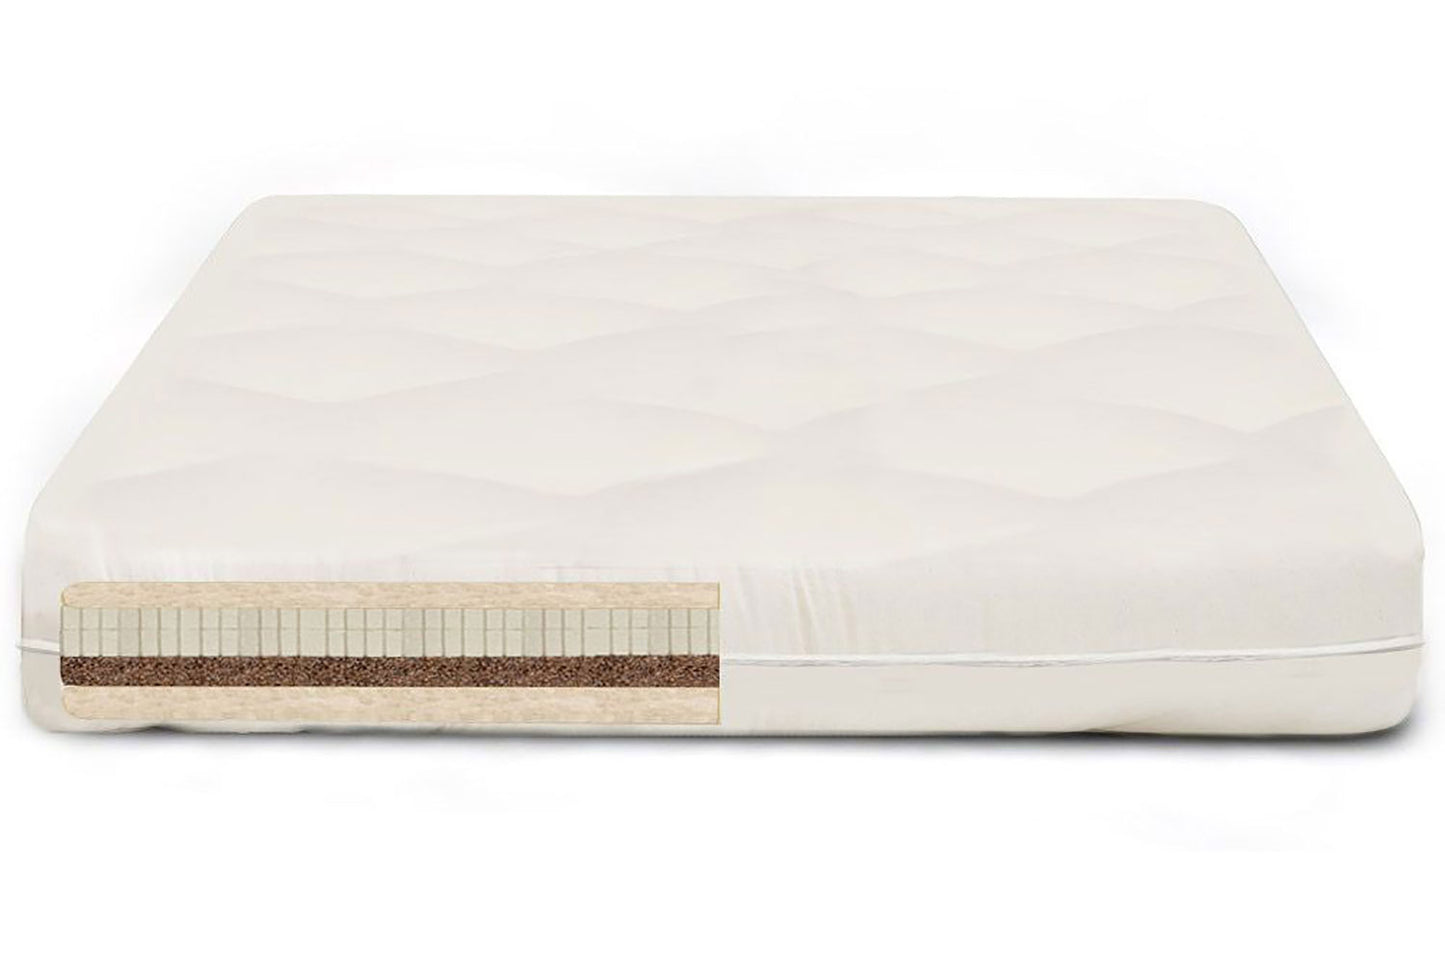 Cocosupport Organic Latex and Wool Mattress